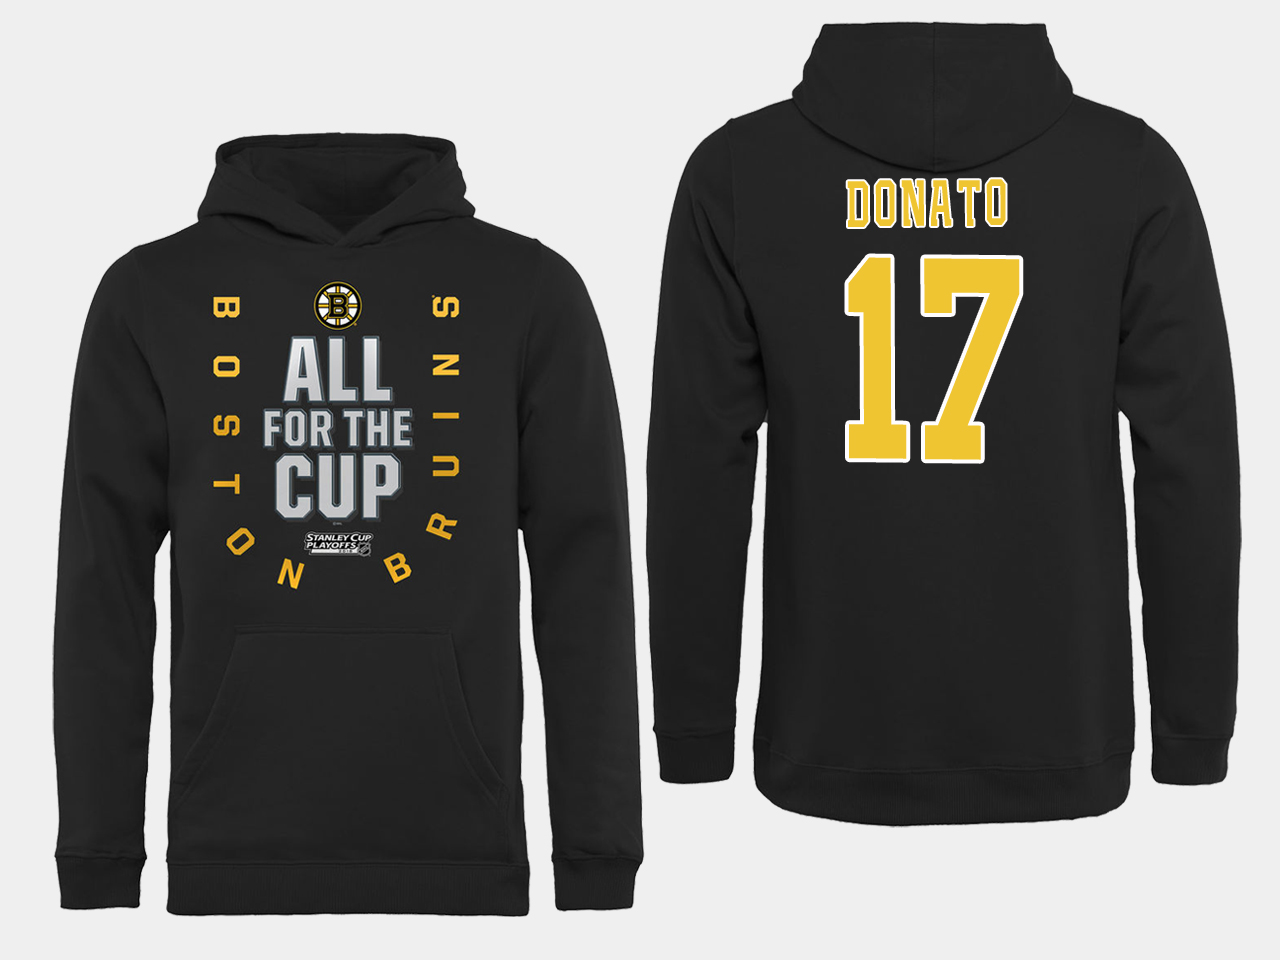 NHL Men Boston Bruins #17 Donato Black All for the Cup Hoodie